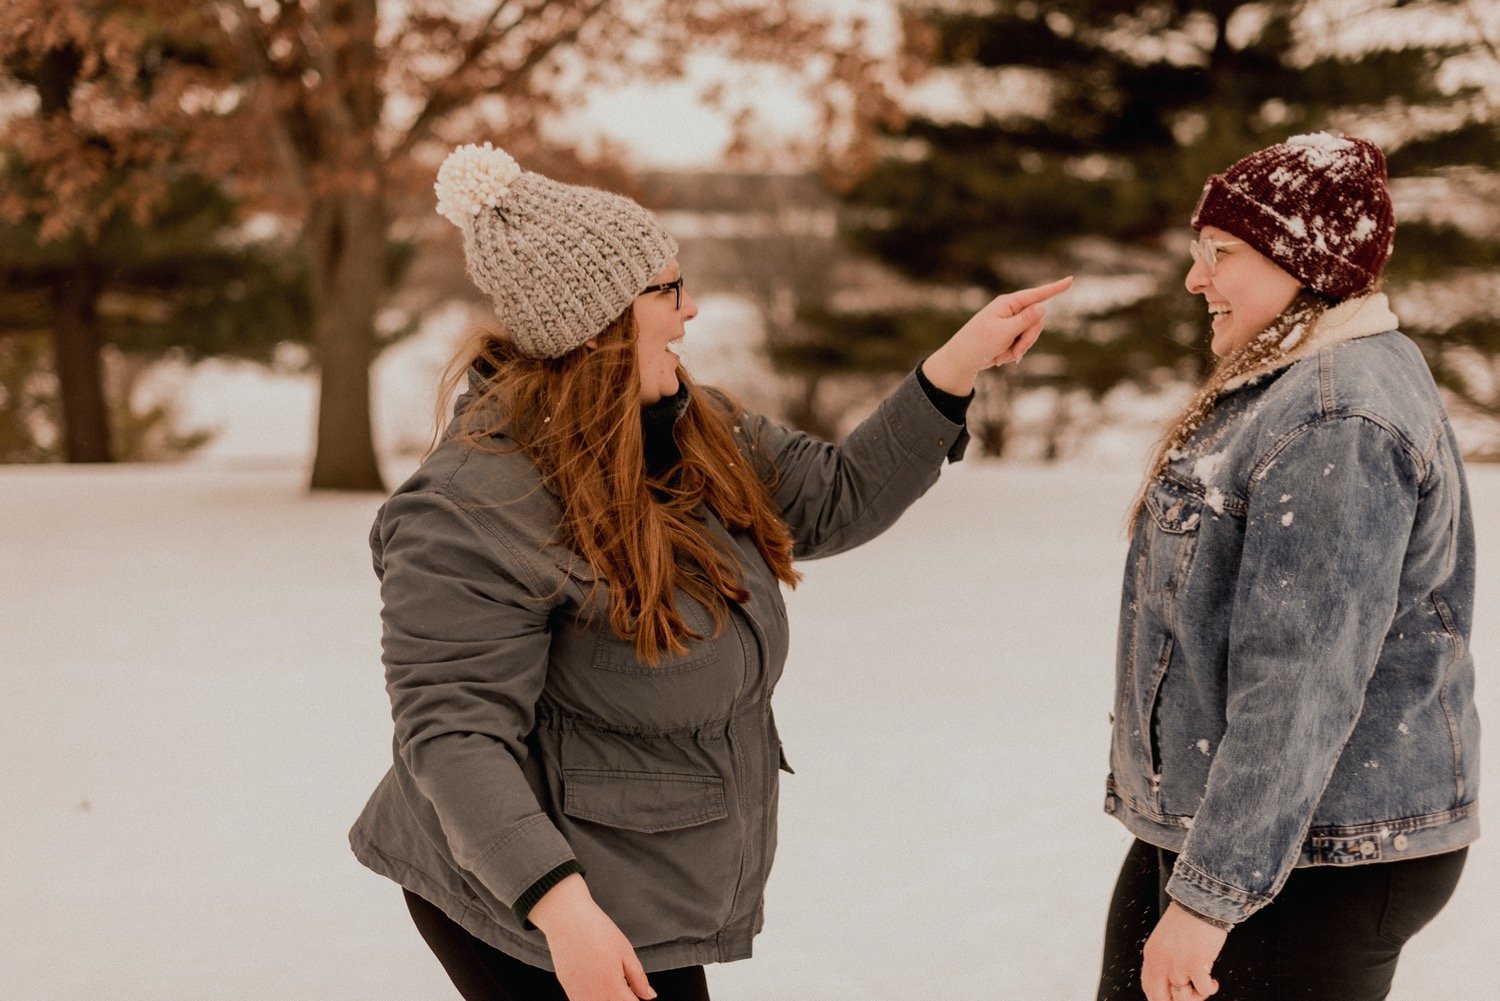 Couple-have-a-snowball-fight-in-the-park.jpg.jpg